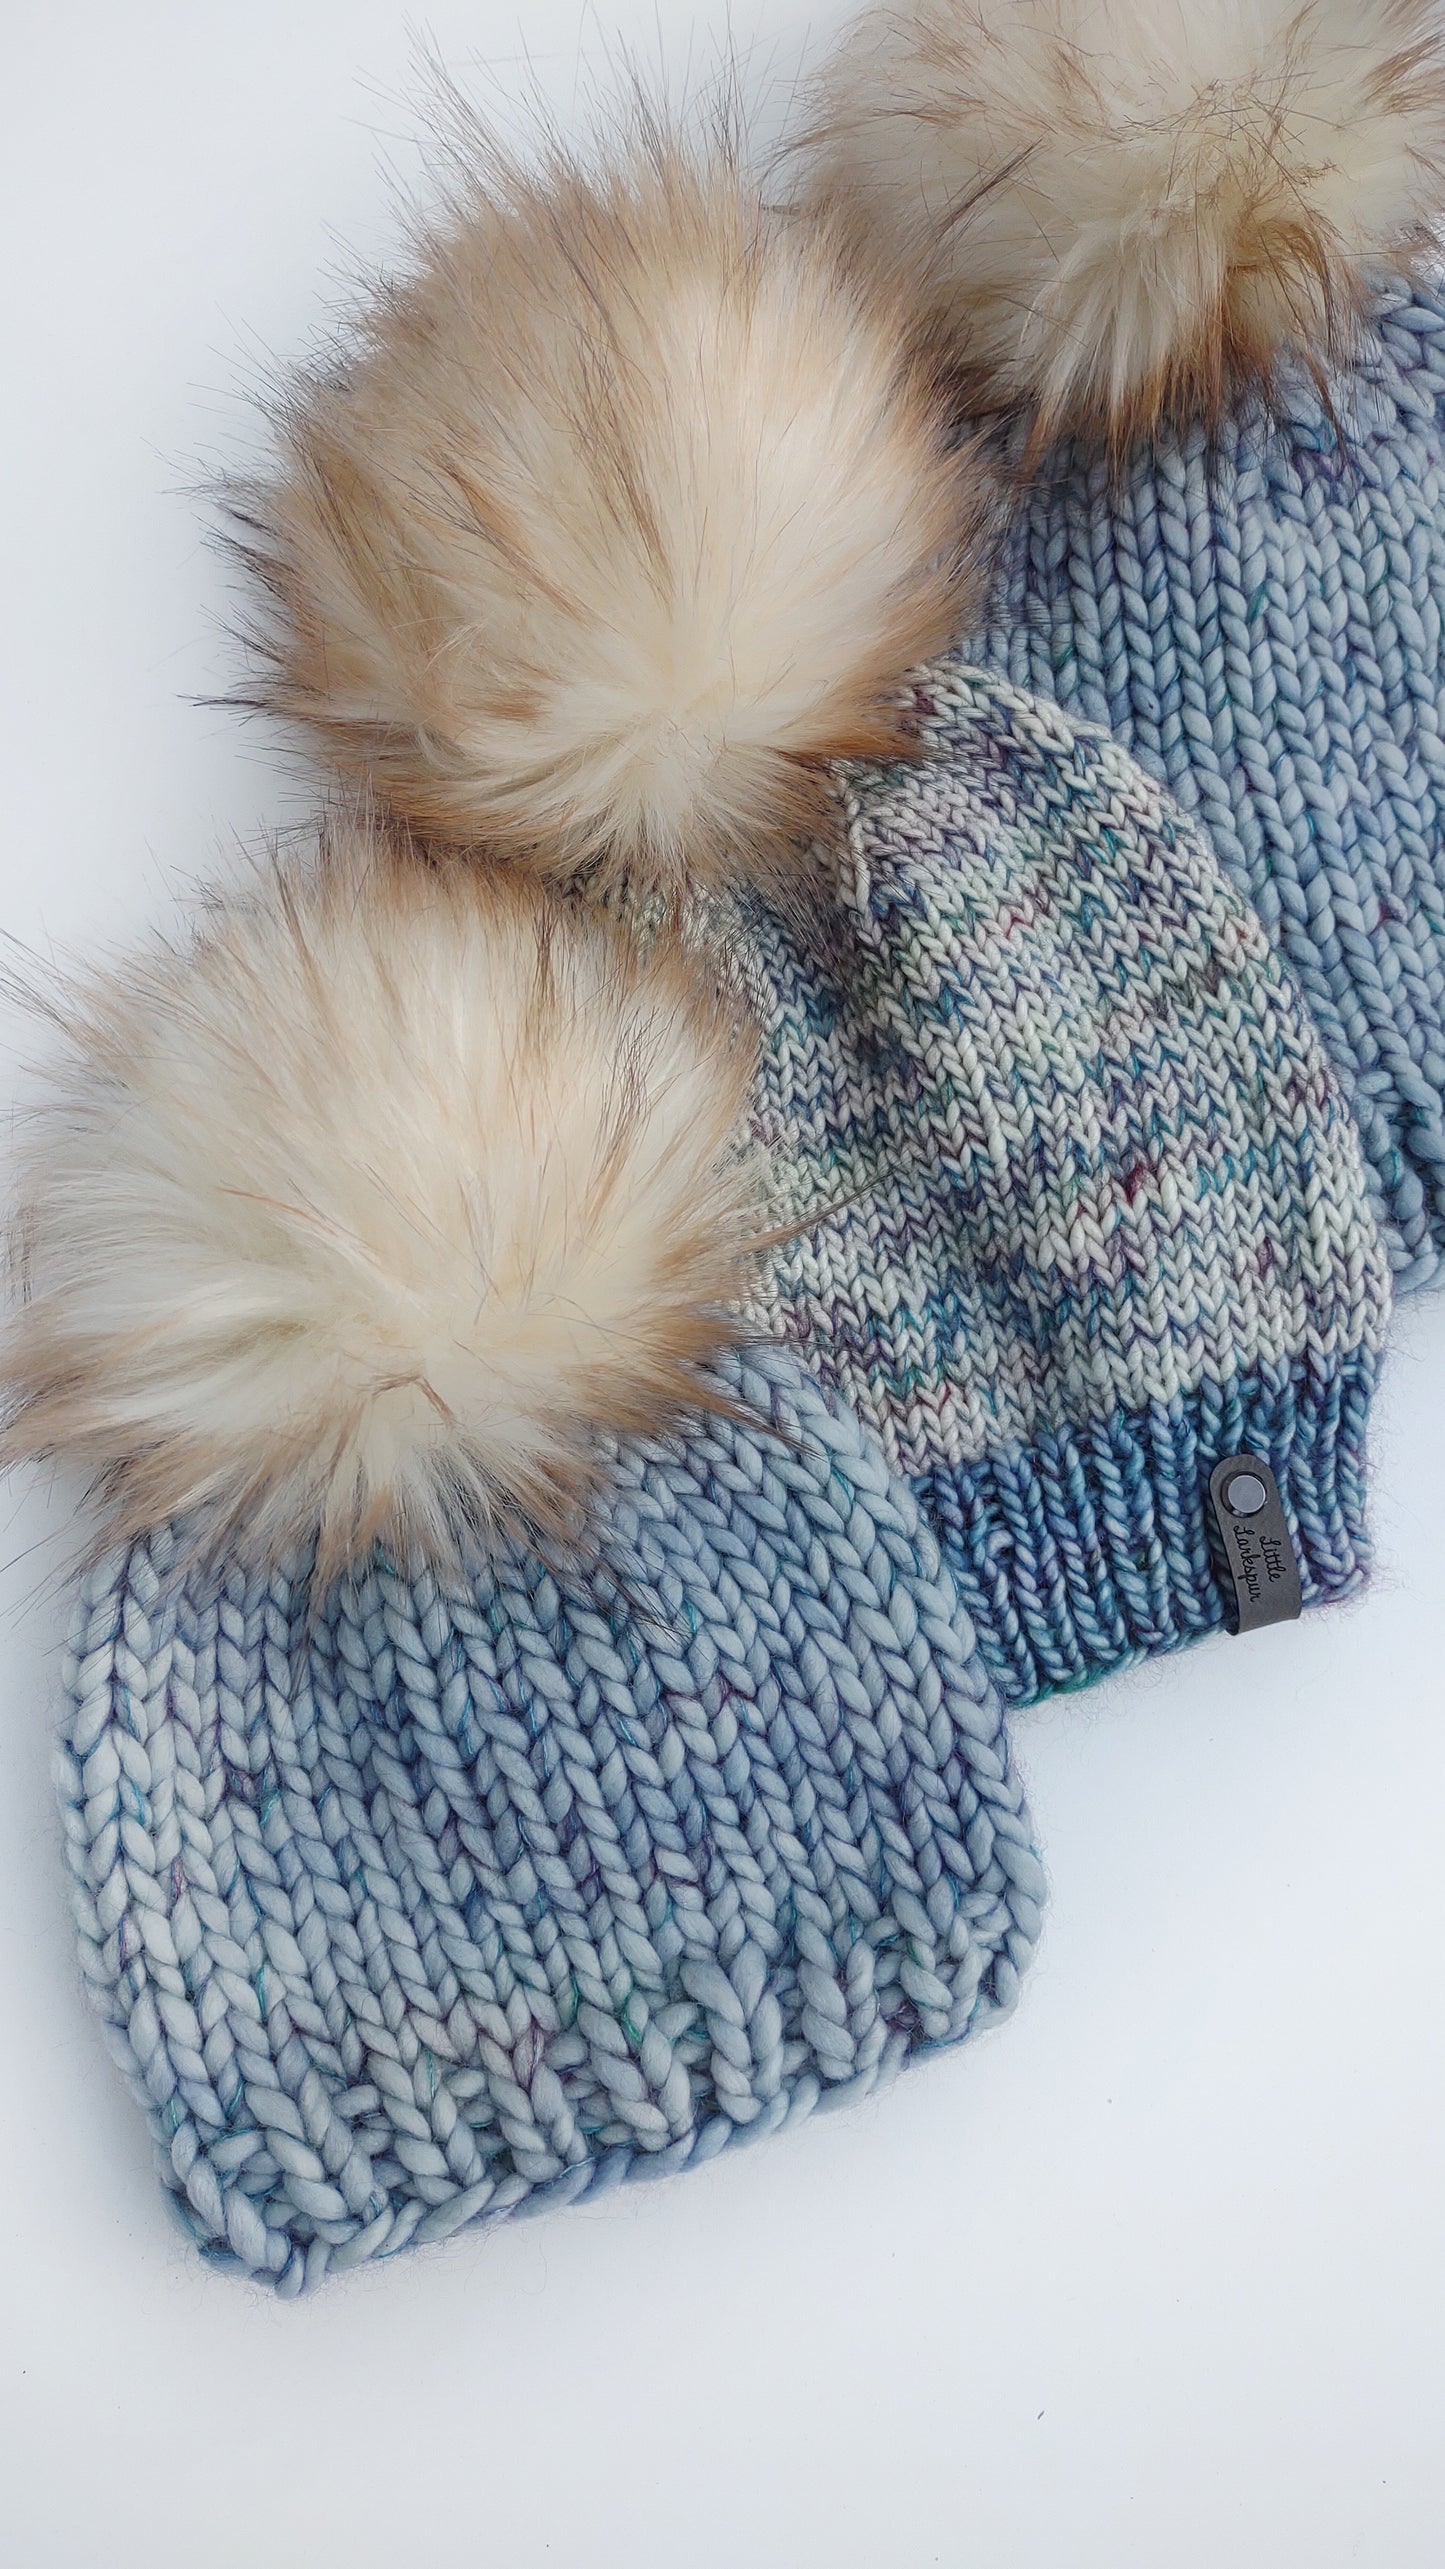 Flatlay of three blue hats with big fluffy white faux fur pom poms